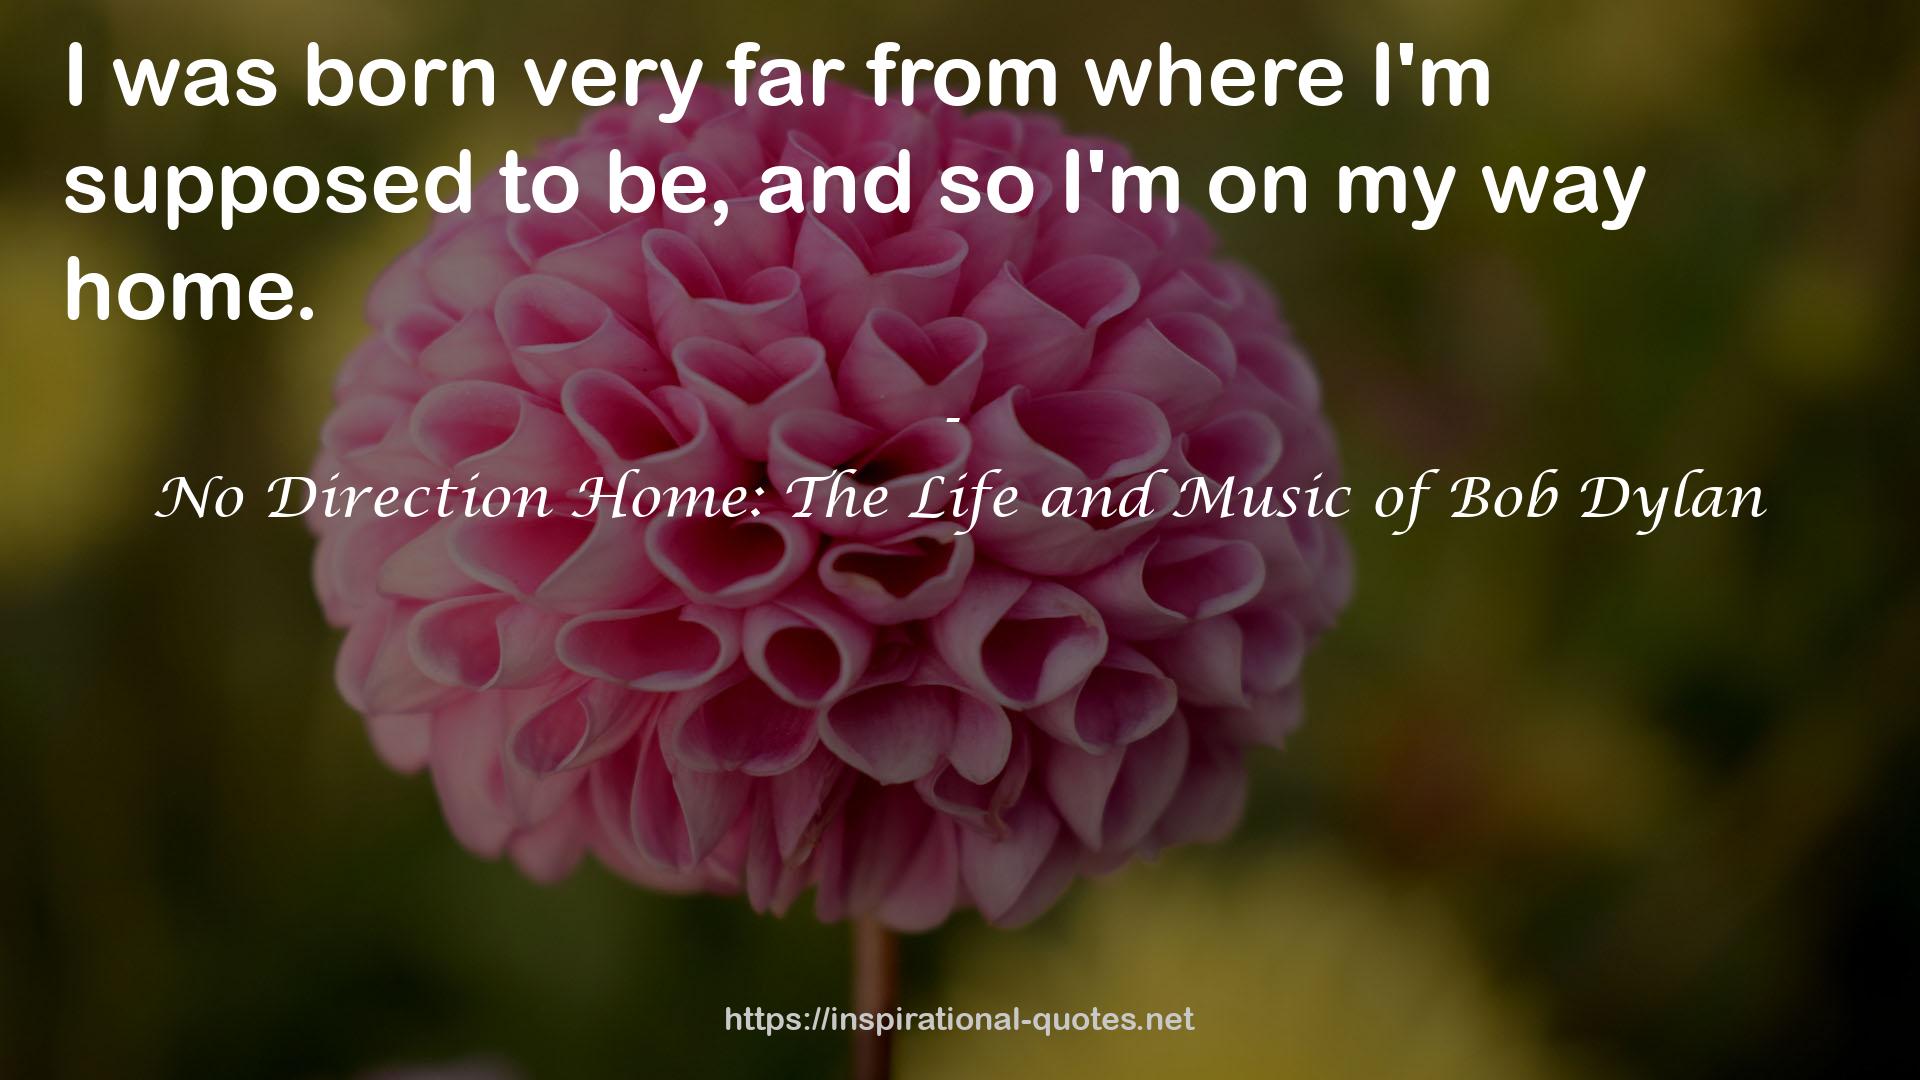 No Direction Home: The Life and Music of Bob Dylan QUOTES